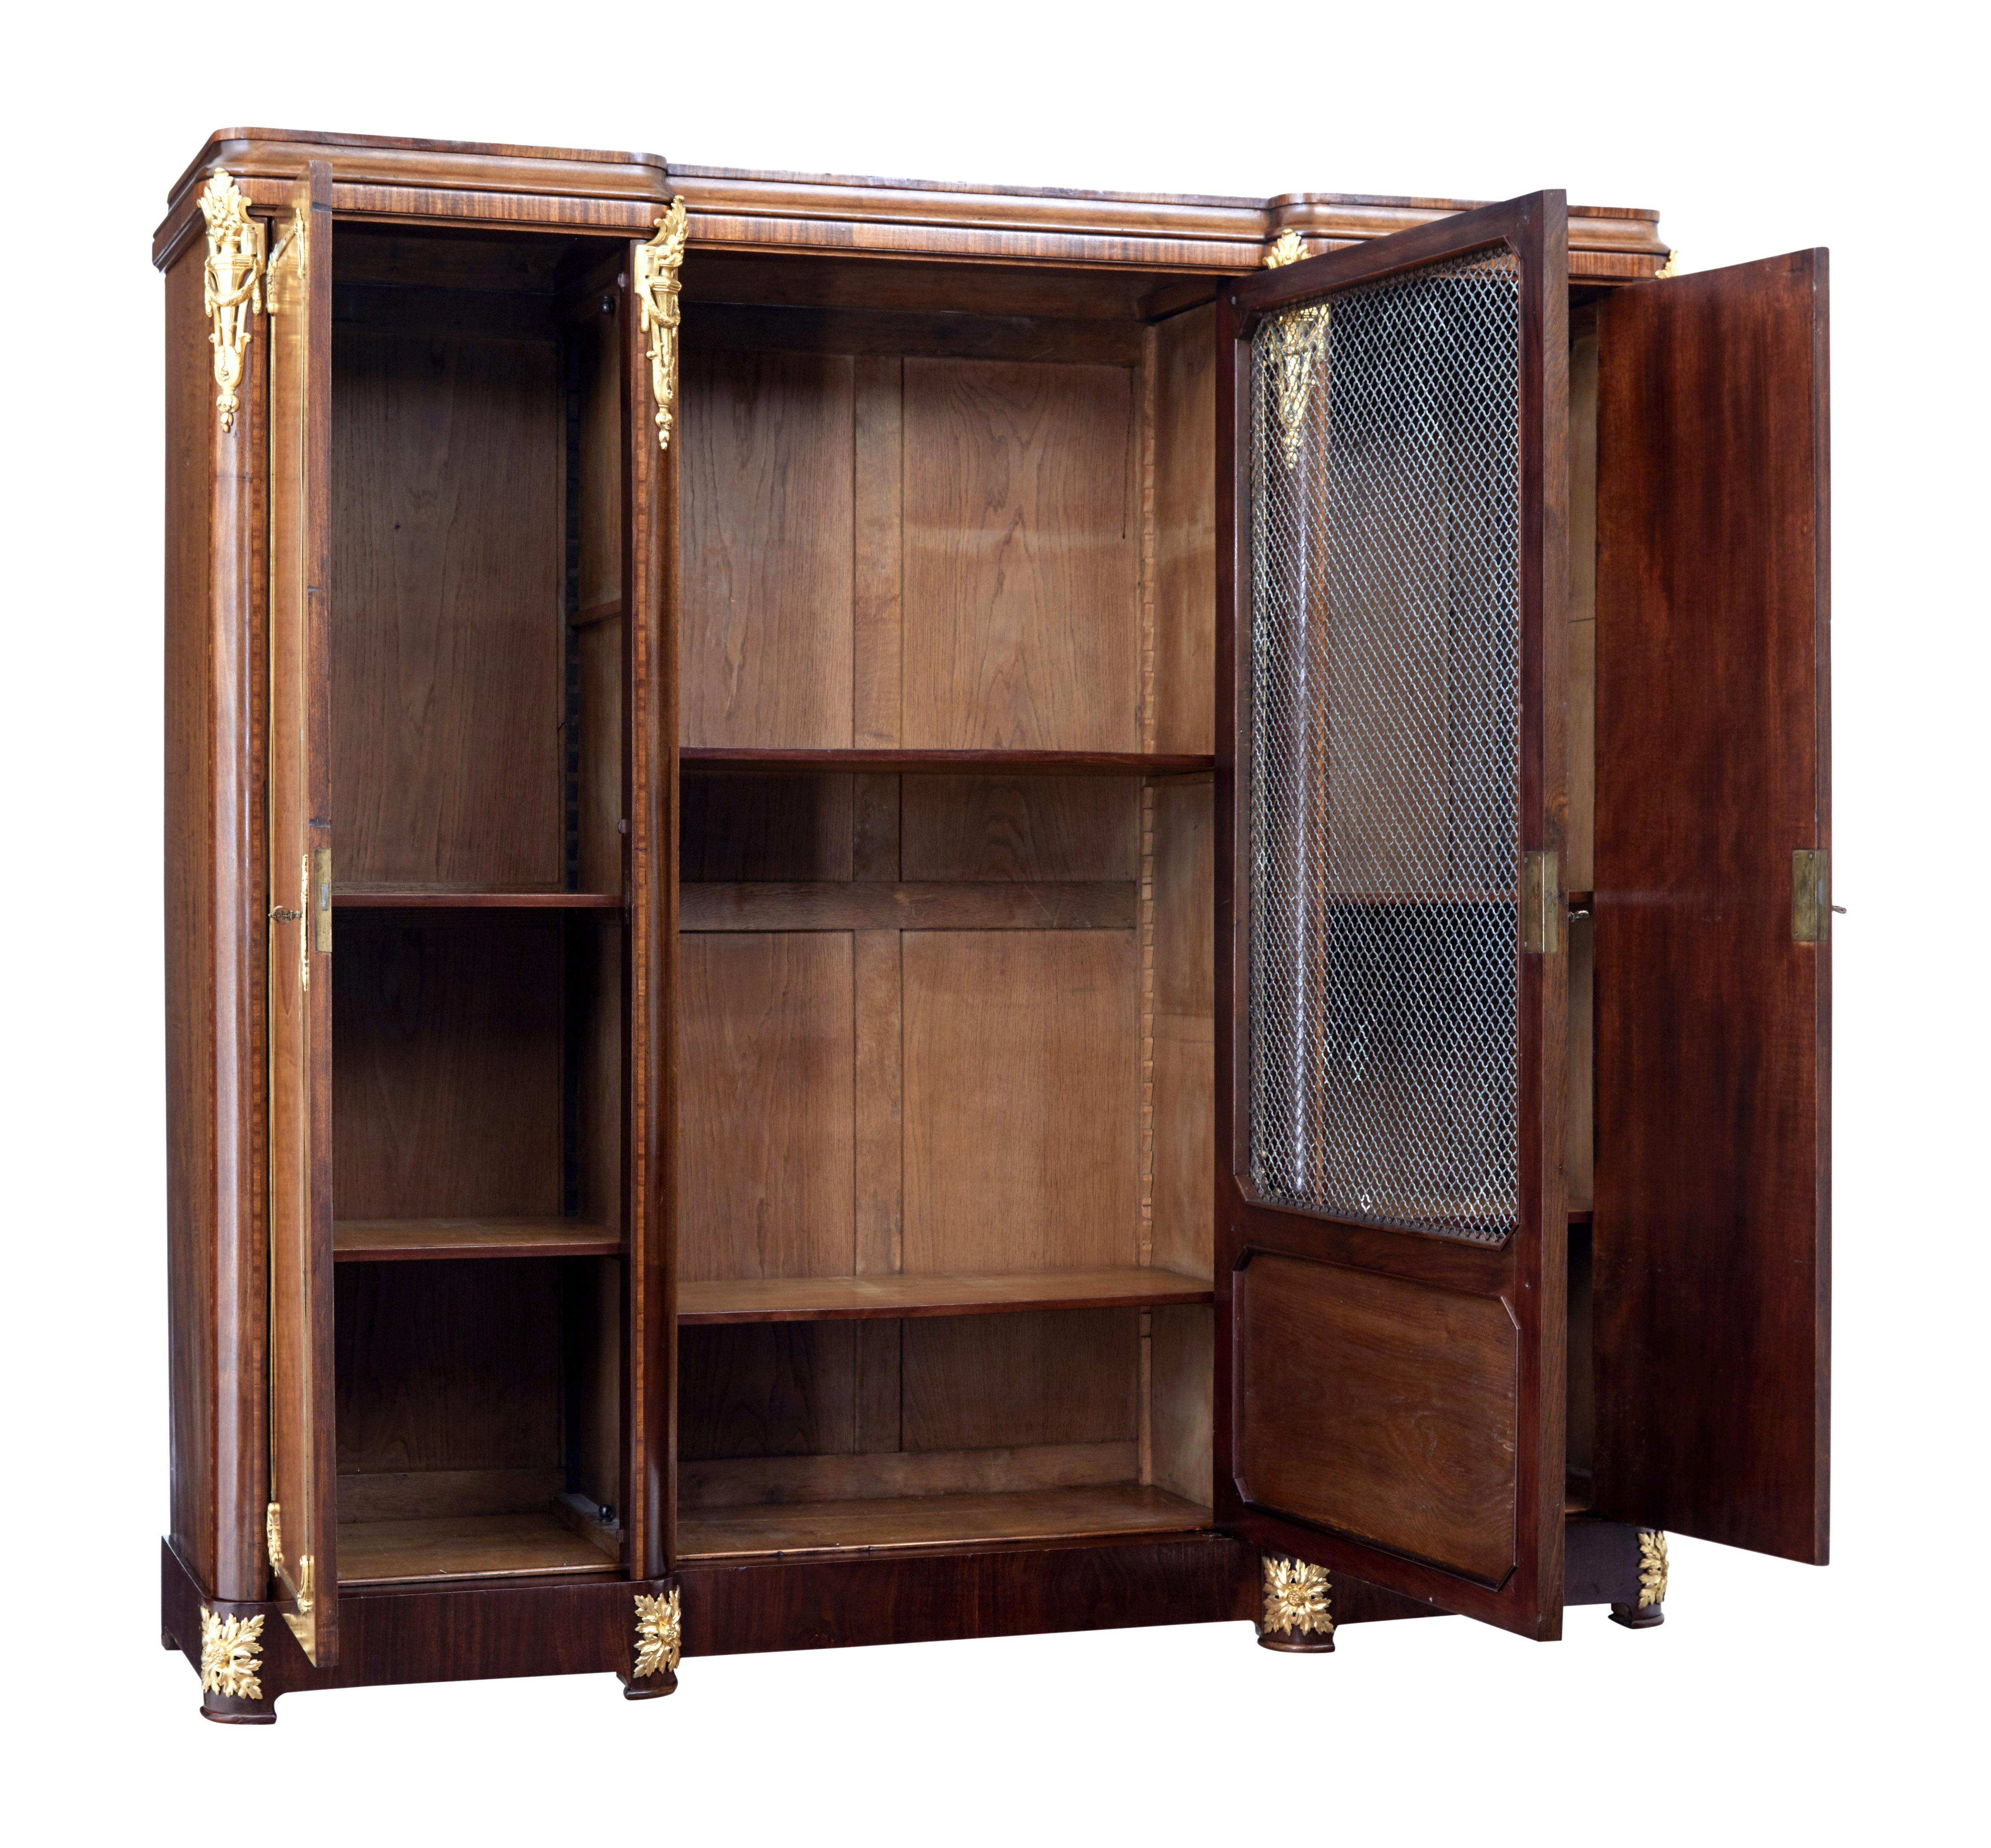 Beautiful bibliotheque circa 1890 to which we have a matching desk.

This cupboard was constructed using a flat pack technique, with panels held in place by bolts.

Central door with decorative latice wire design, flanked either side with a